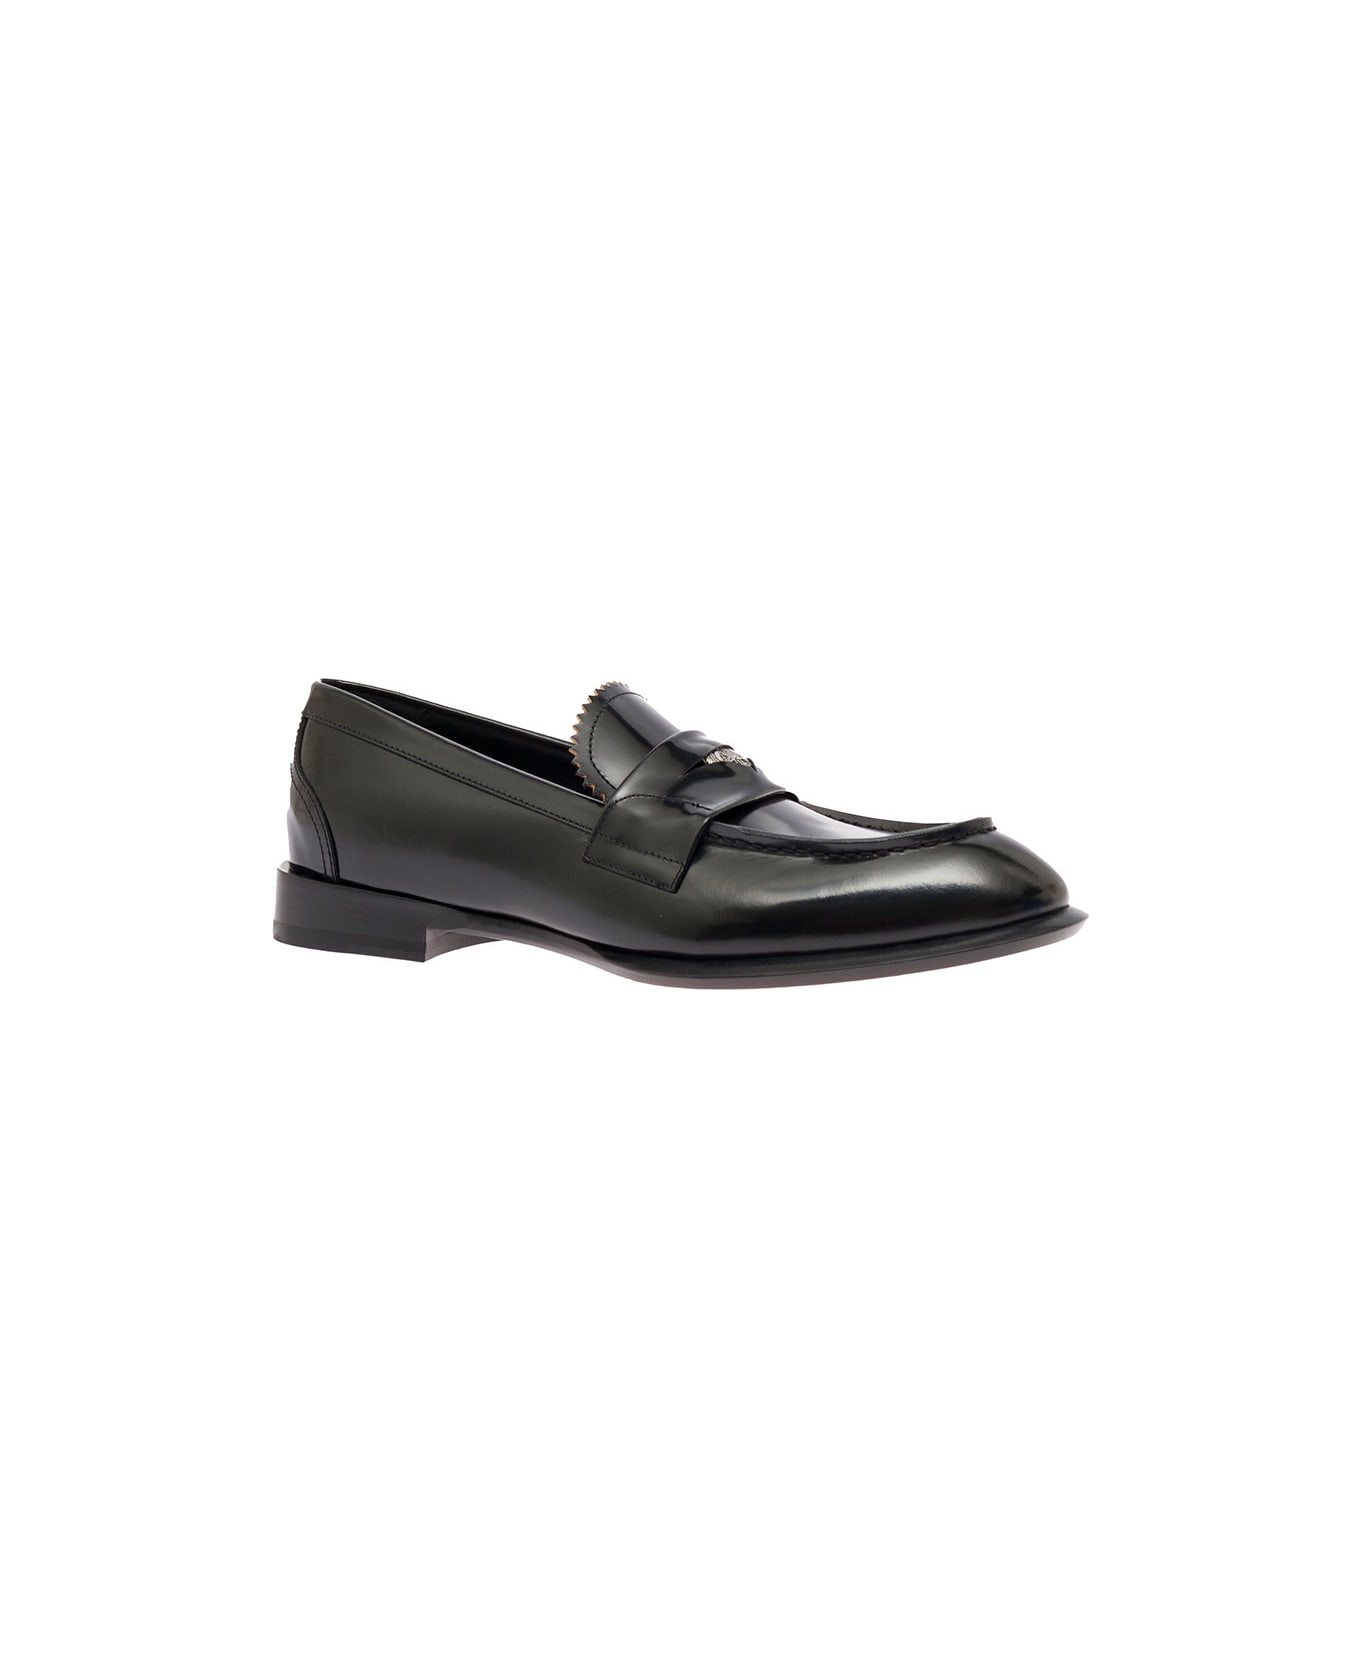 Alexander McQueen Man's Black Leather Loafers With Logo - Black